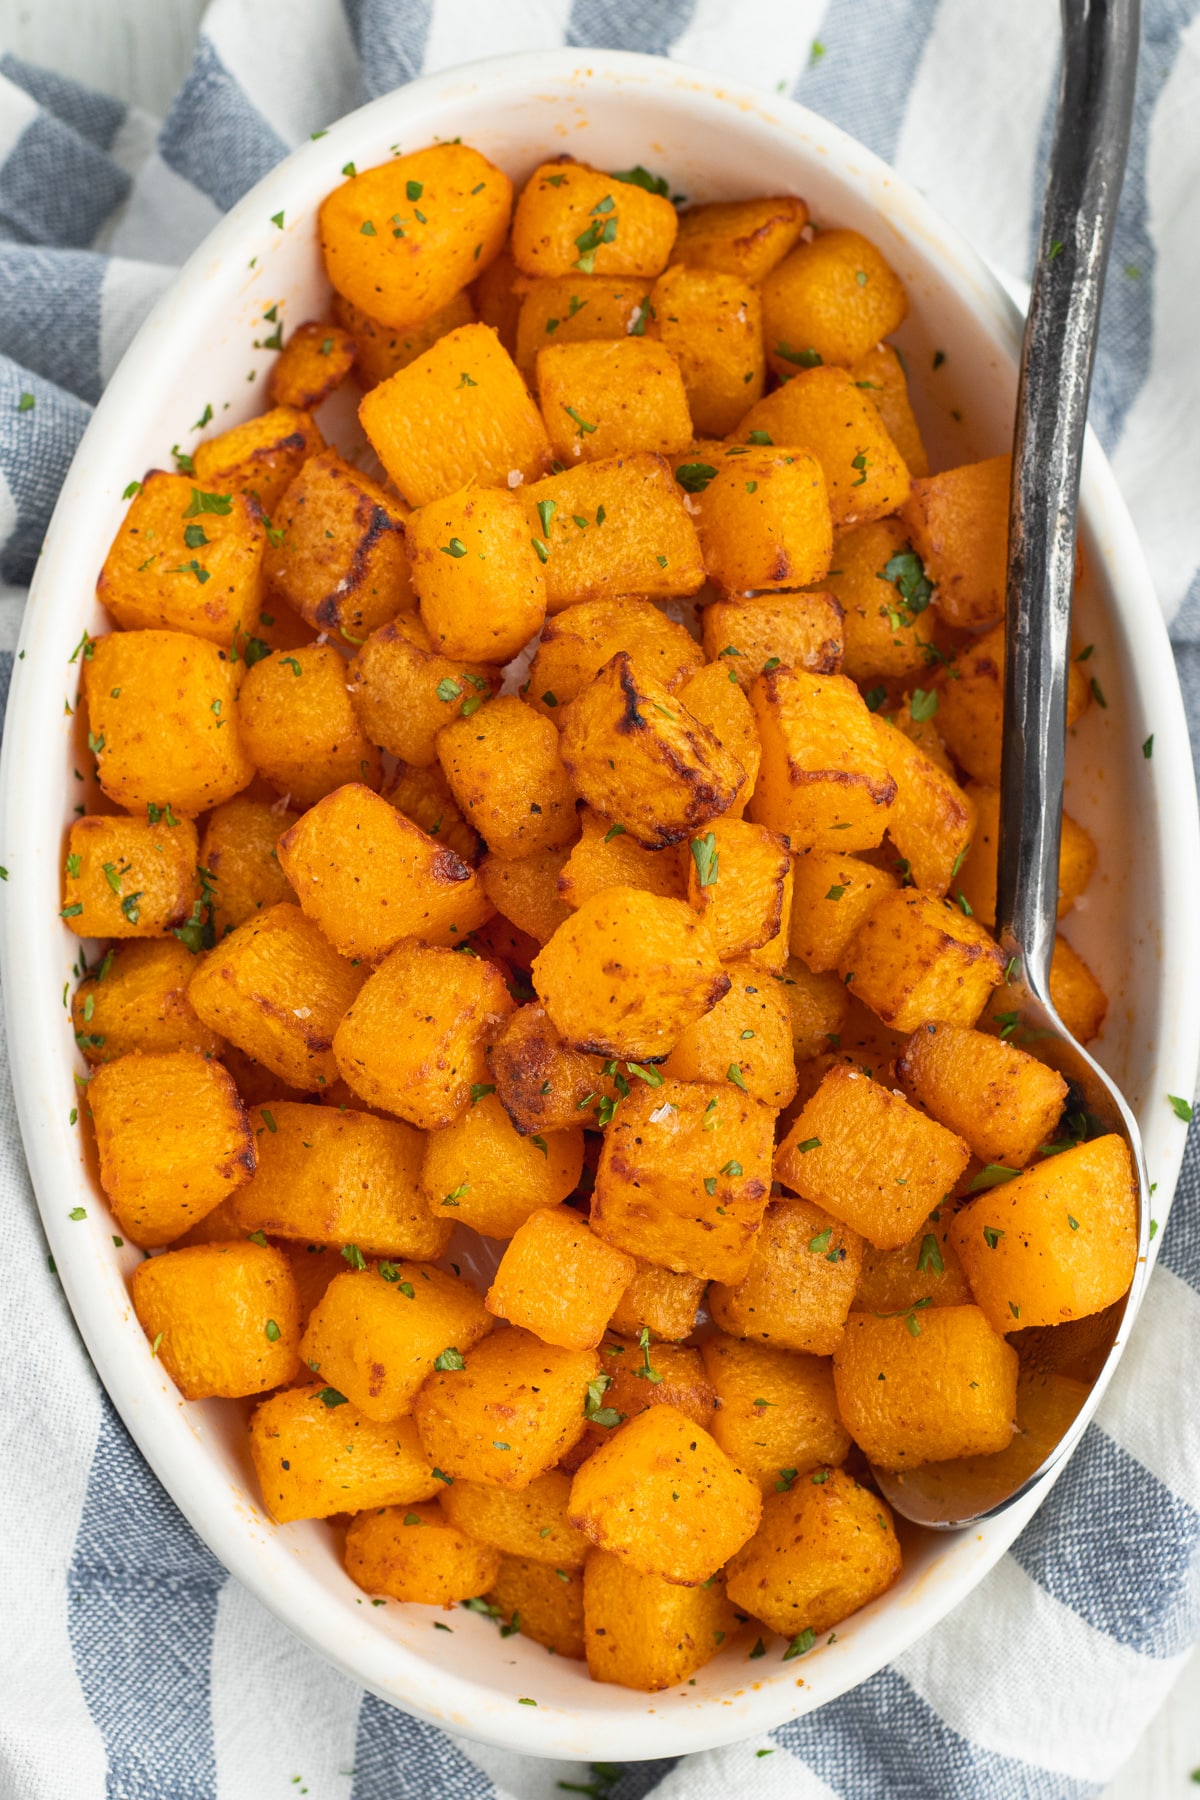 This is a picture of an oval dish filled with cooked butternut squash.